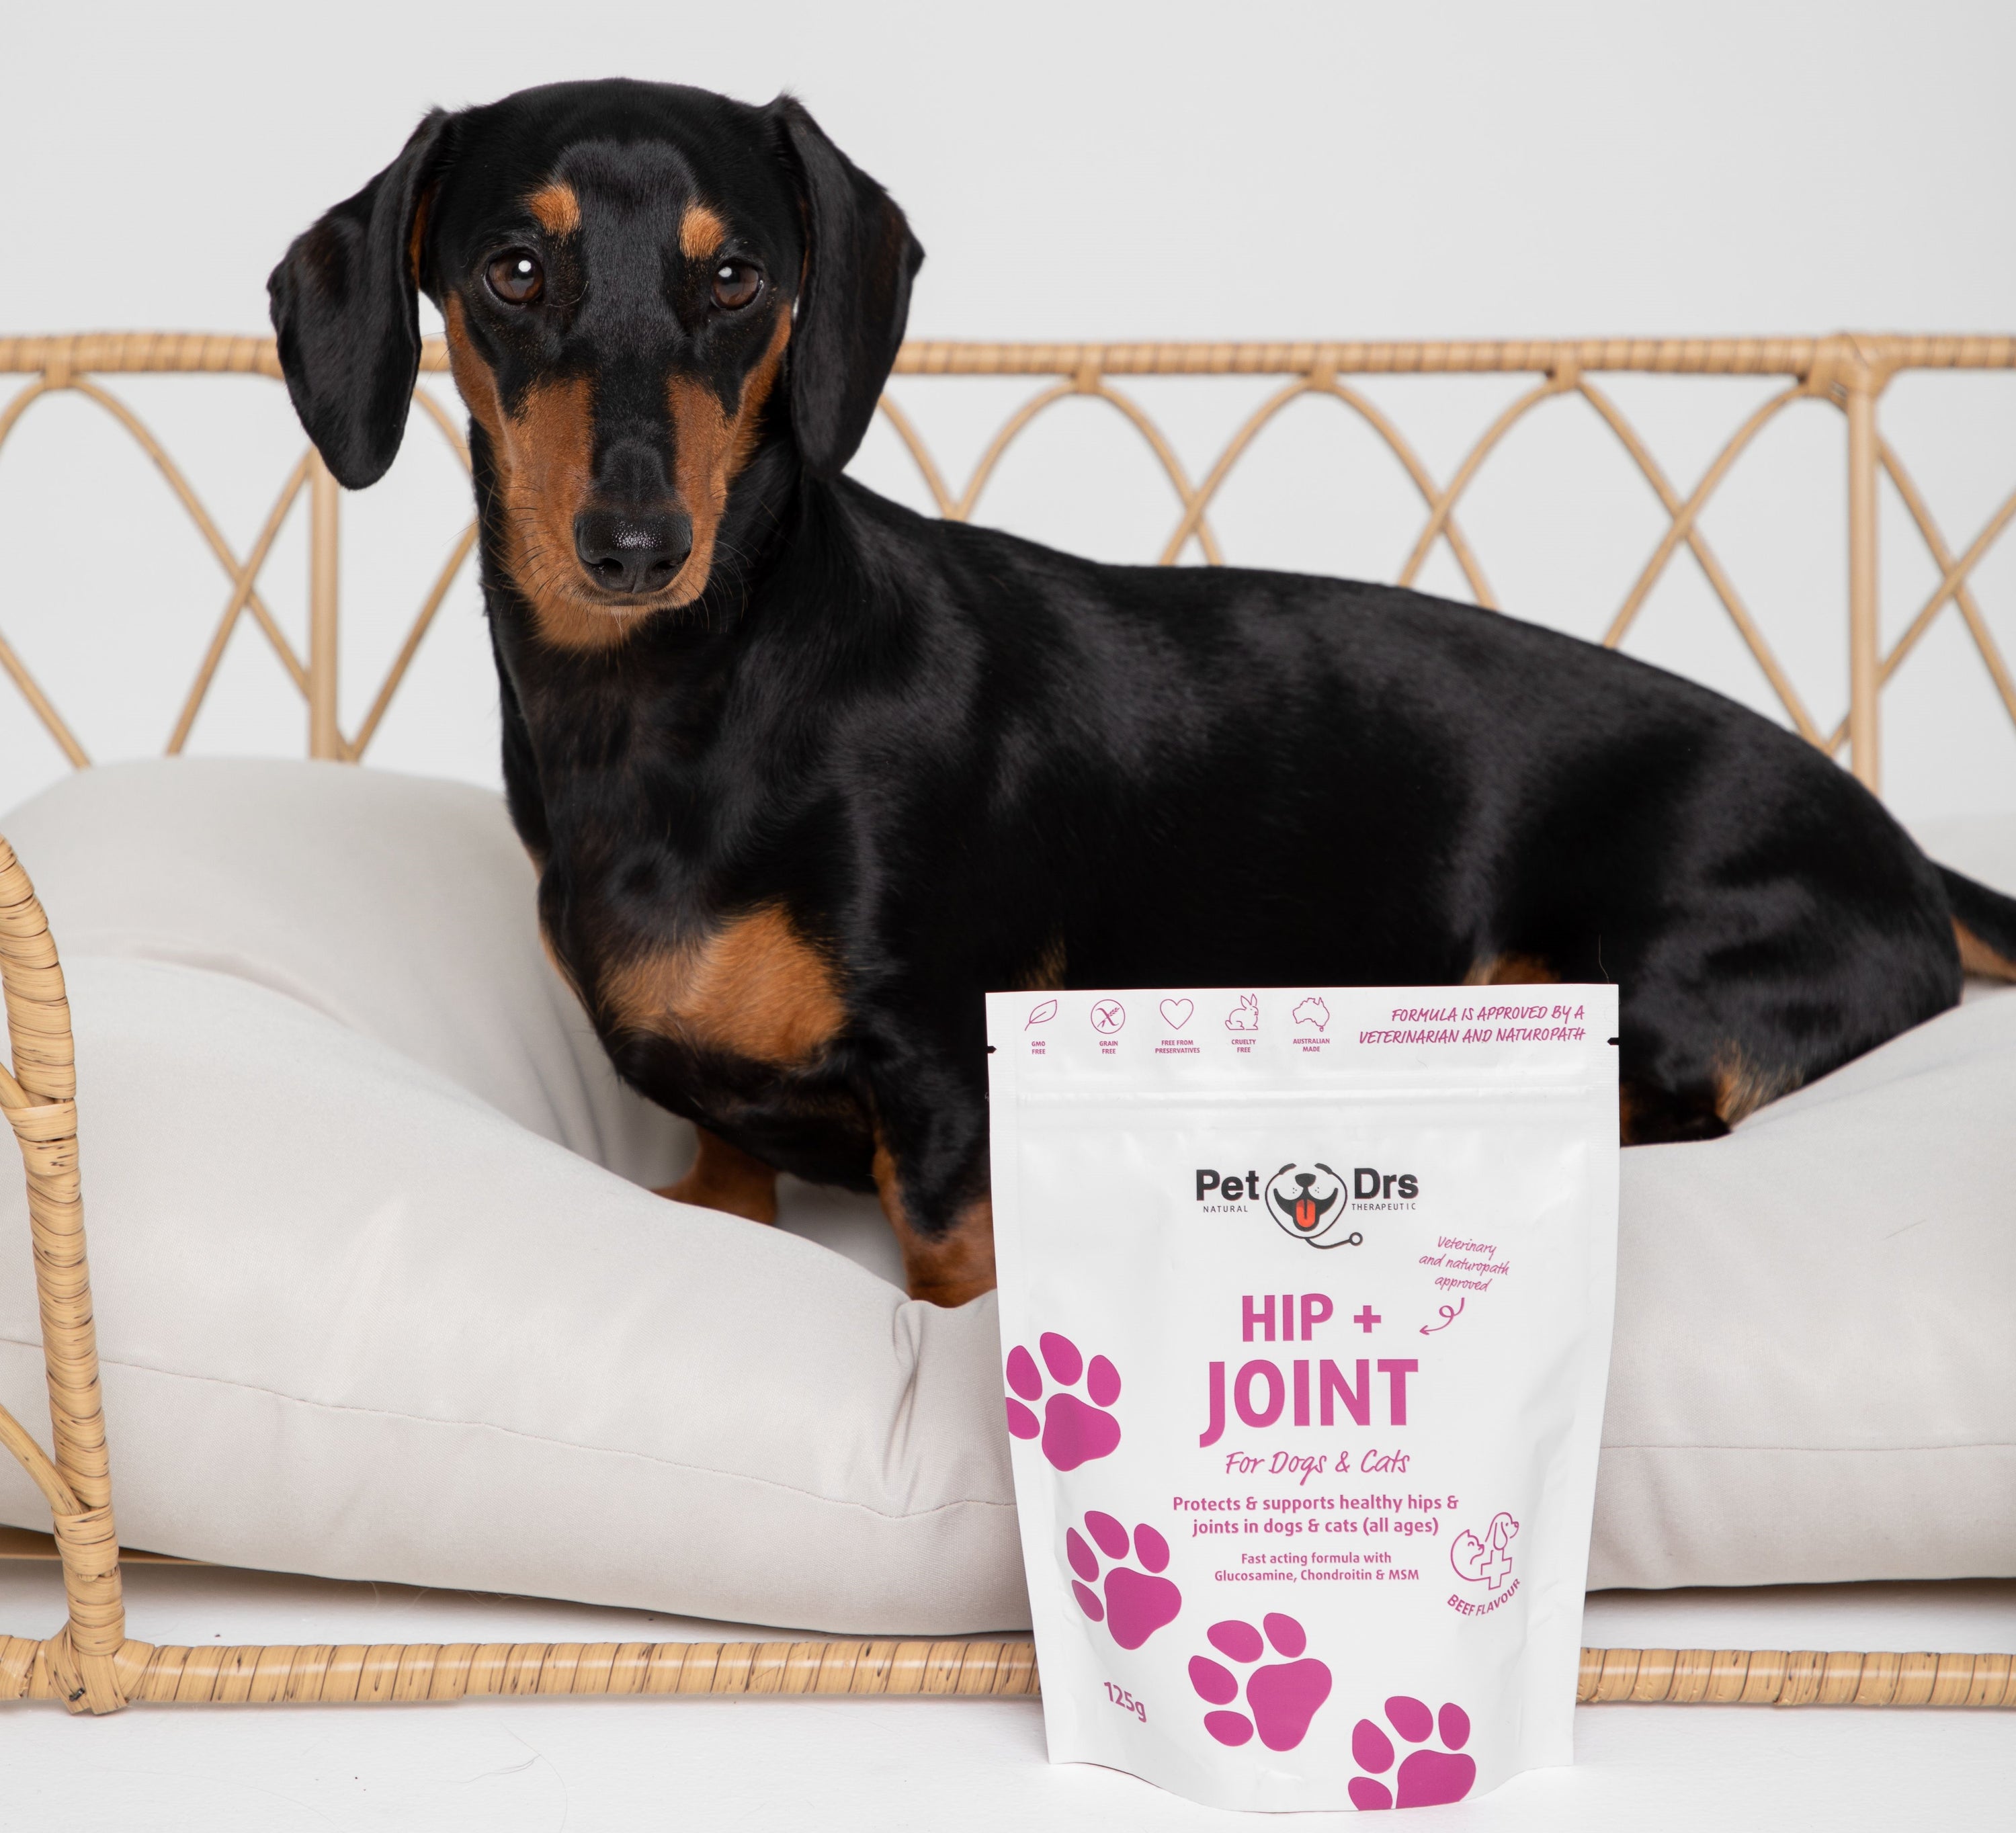 How To Care For Your Dog's Hip & Joints